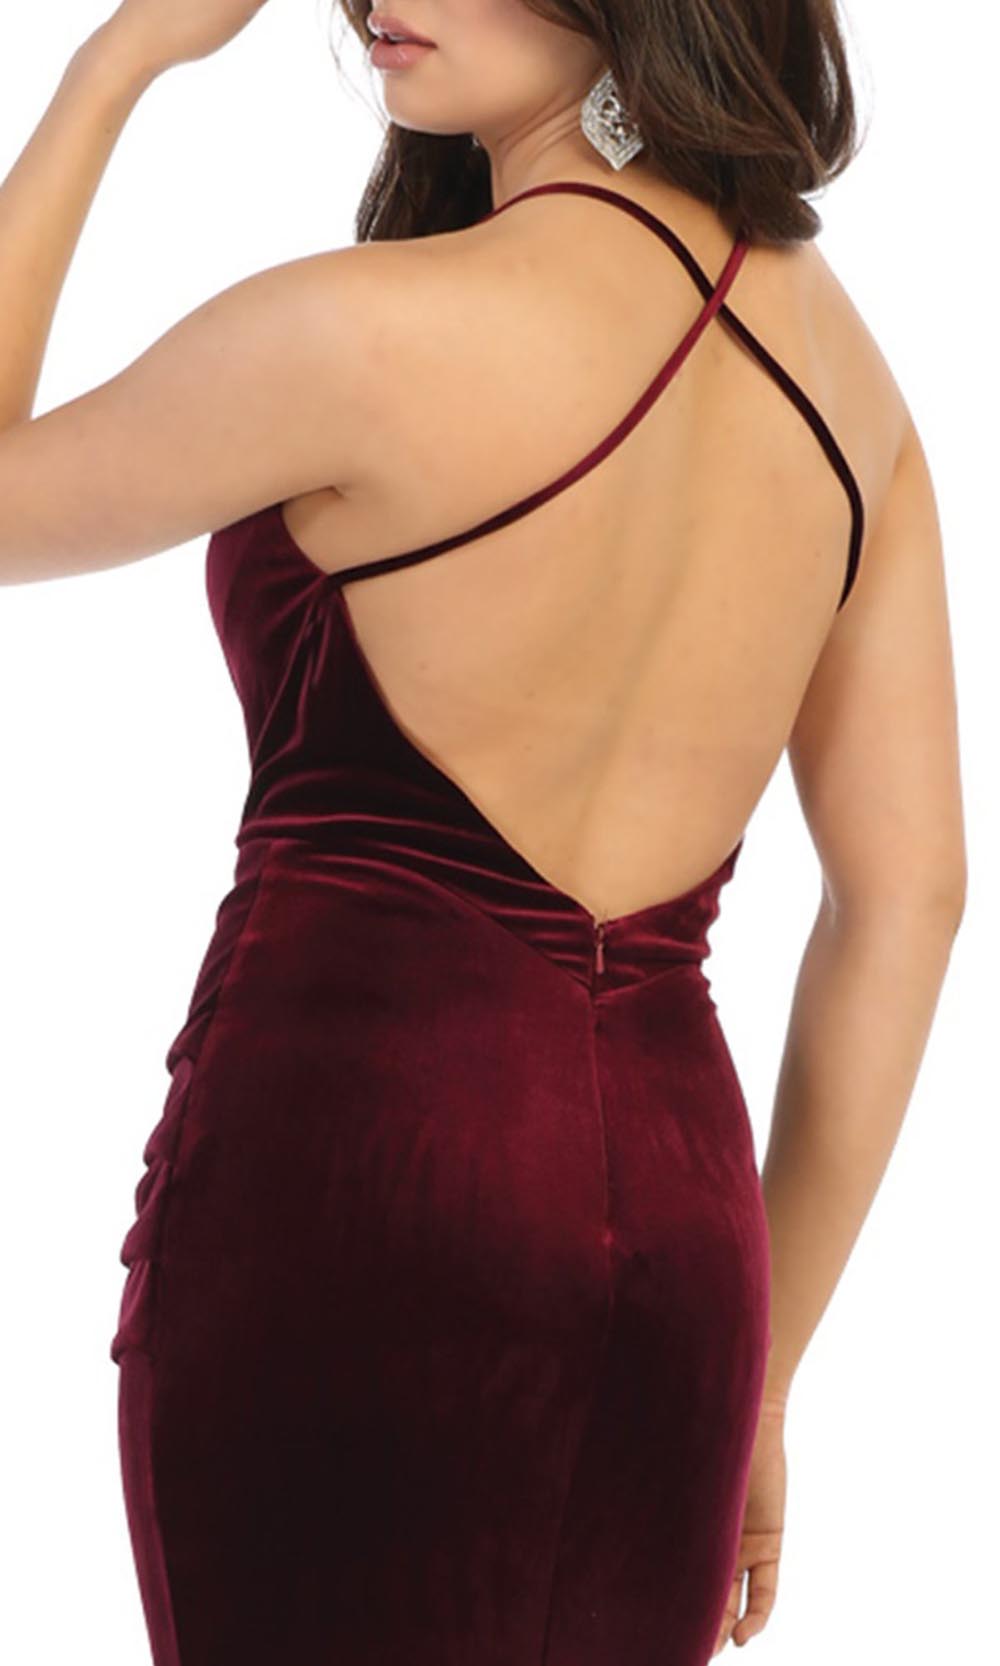 May Queen - Spaghetti Strap Velvet Trumpet Evening Dress MQ1656 - 1 pc Hunter Green In Size 2, and 1 pc Burgundy in size 10 Available CCSALE 10 / Burgundy